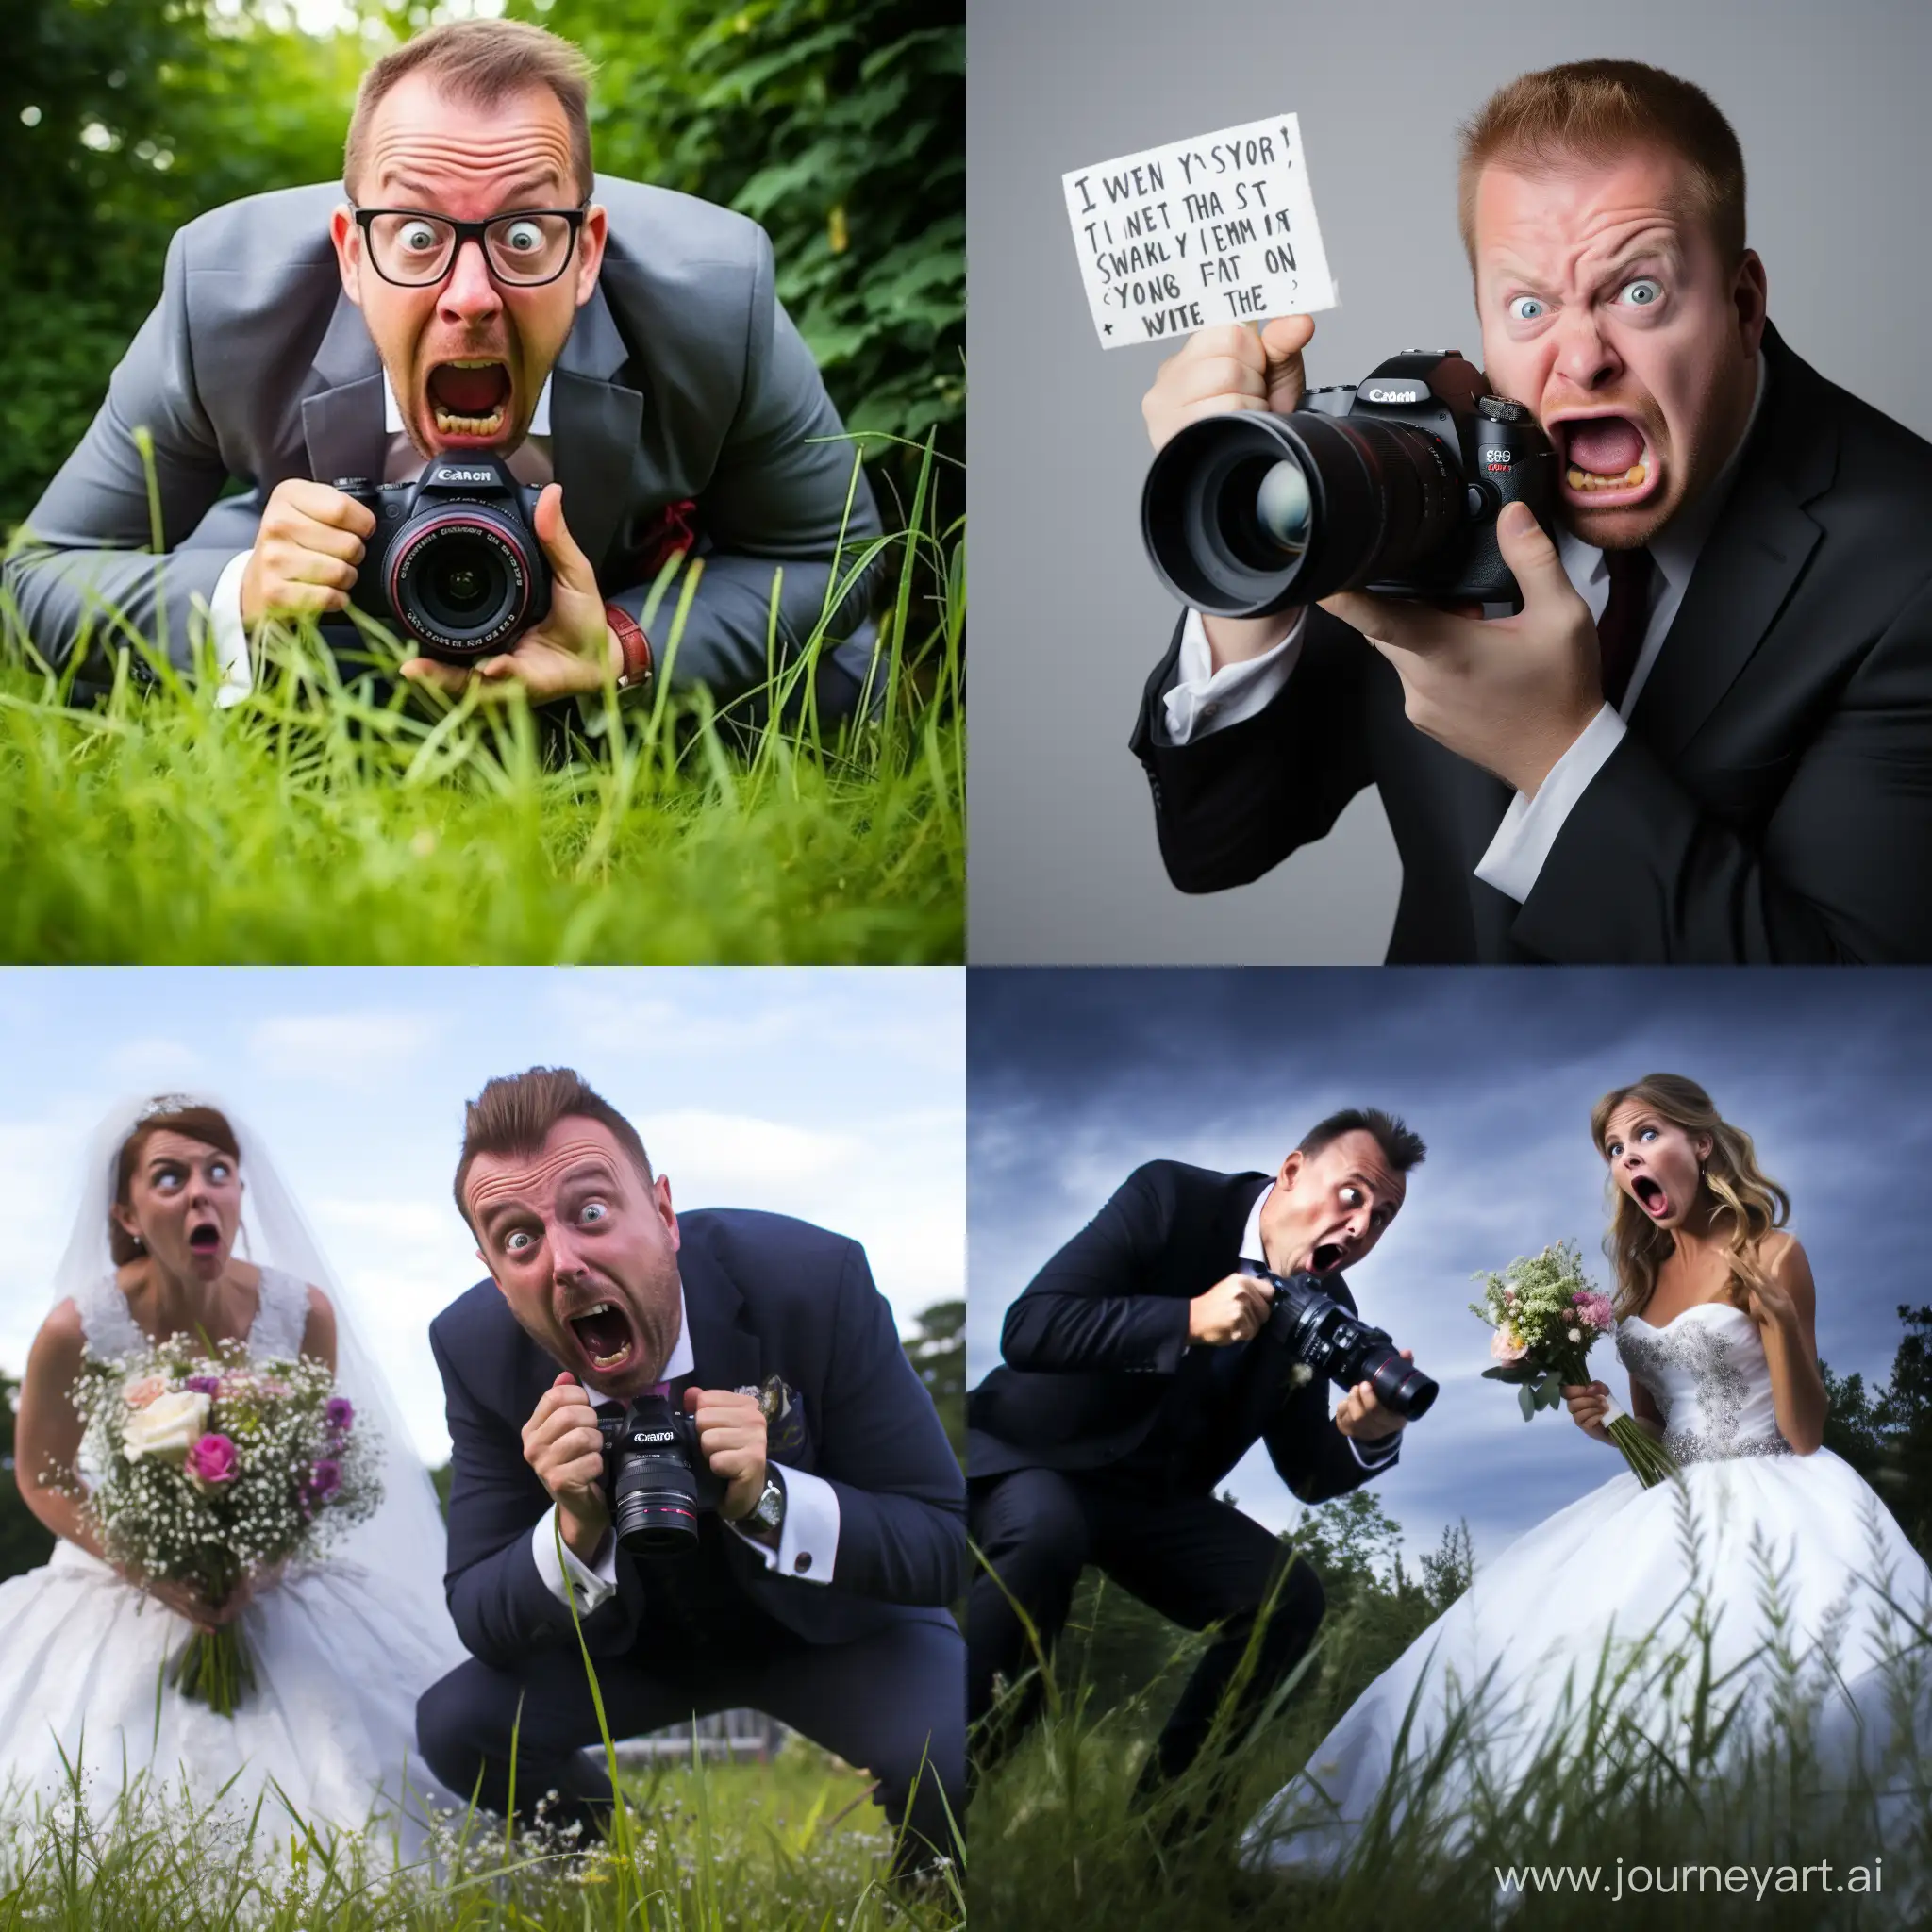 Humorous-Wedding-Photographer-Clash-Unruly-Rivalry-Captured-in-a-11-Aspect-Ratio